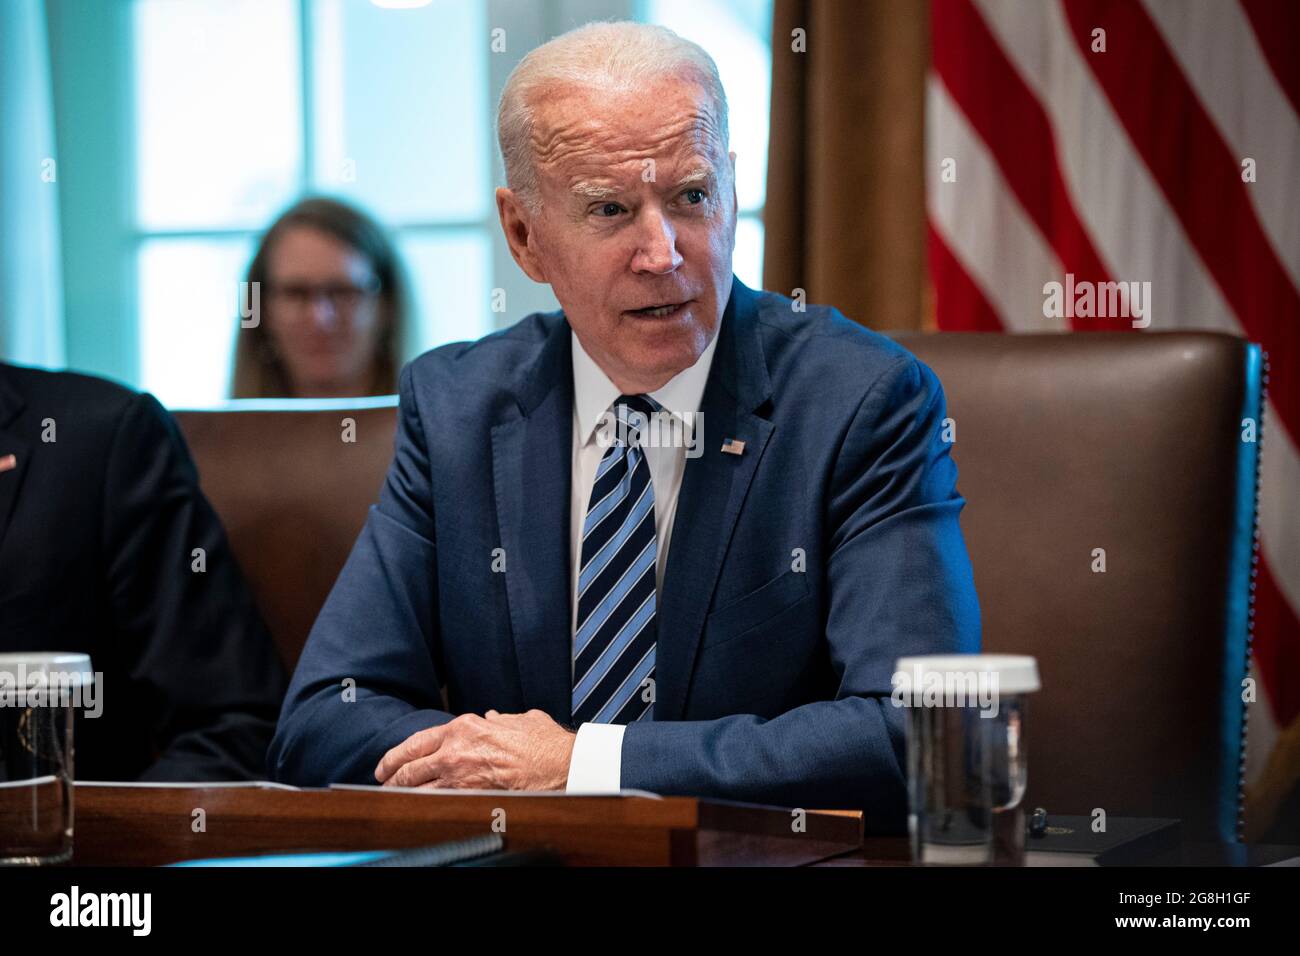 Washington, USA. 20th July, 2021. U.S. President Joe Biden speaks during a cabinet meeting at the White House in Washington, DC, U.S., on Tuesday, July 20, 2021. Biden administration officials say they're starting to see signs of relief for the global semiconductor supply shortage, including commitments from manufacturers to make more automotive-grade chips for car companies. Photographer: Al Drago/Pool/Sipa USA Credit: Sipa USA/Alamy Live News Stock Photo